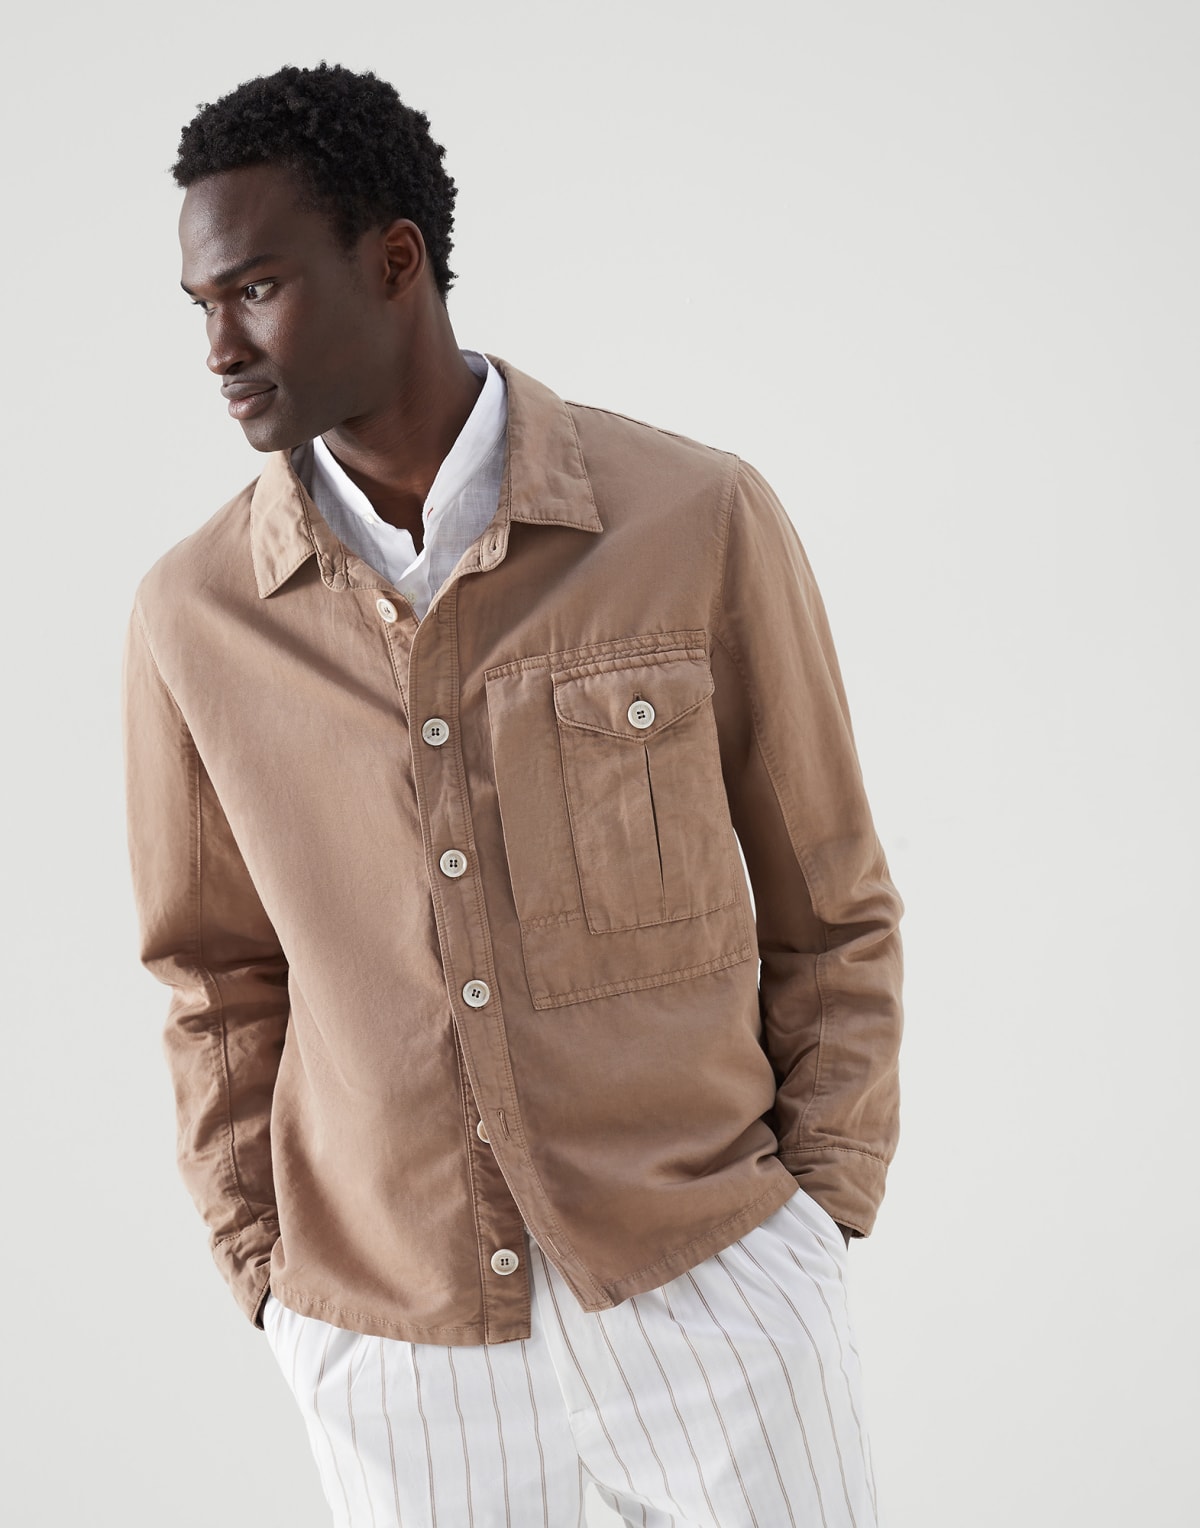 Brunello Cucinelli Garment-dyed shirt-style outerwear jacket in twisted linen and cotton gabardine